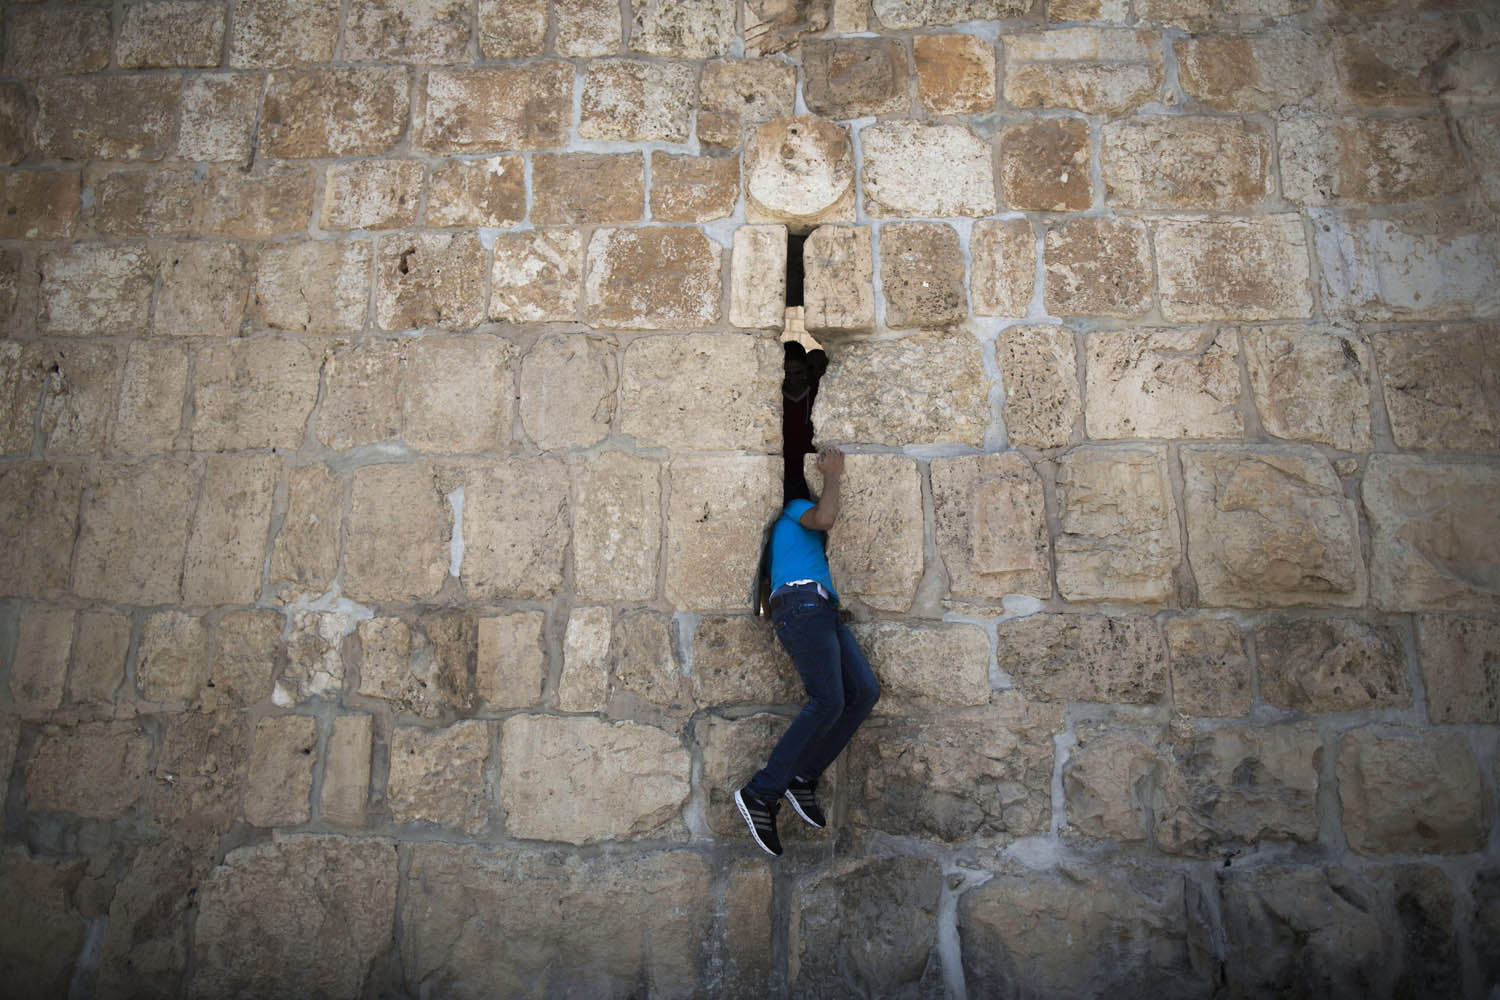 July 12, 2013. A Palestinian Muslim worshipper sneaks through a hole in the Old City wall near the Lions Gate after prayers at the Al Aqsa Mosque in Jerusalem's Old City.